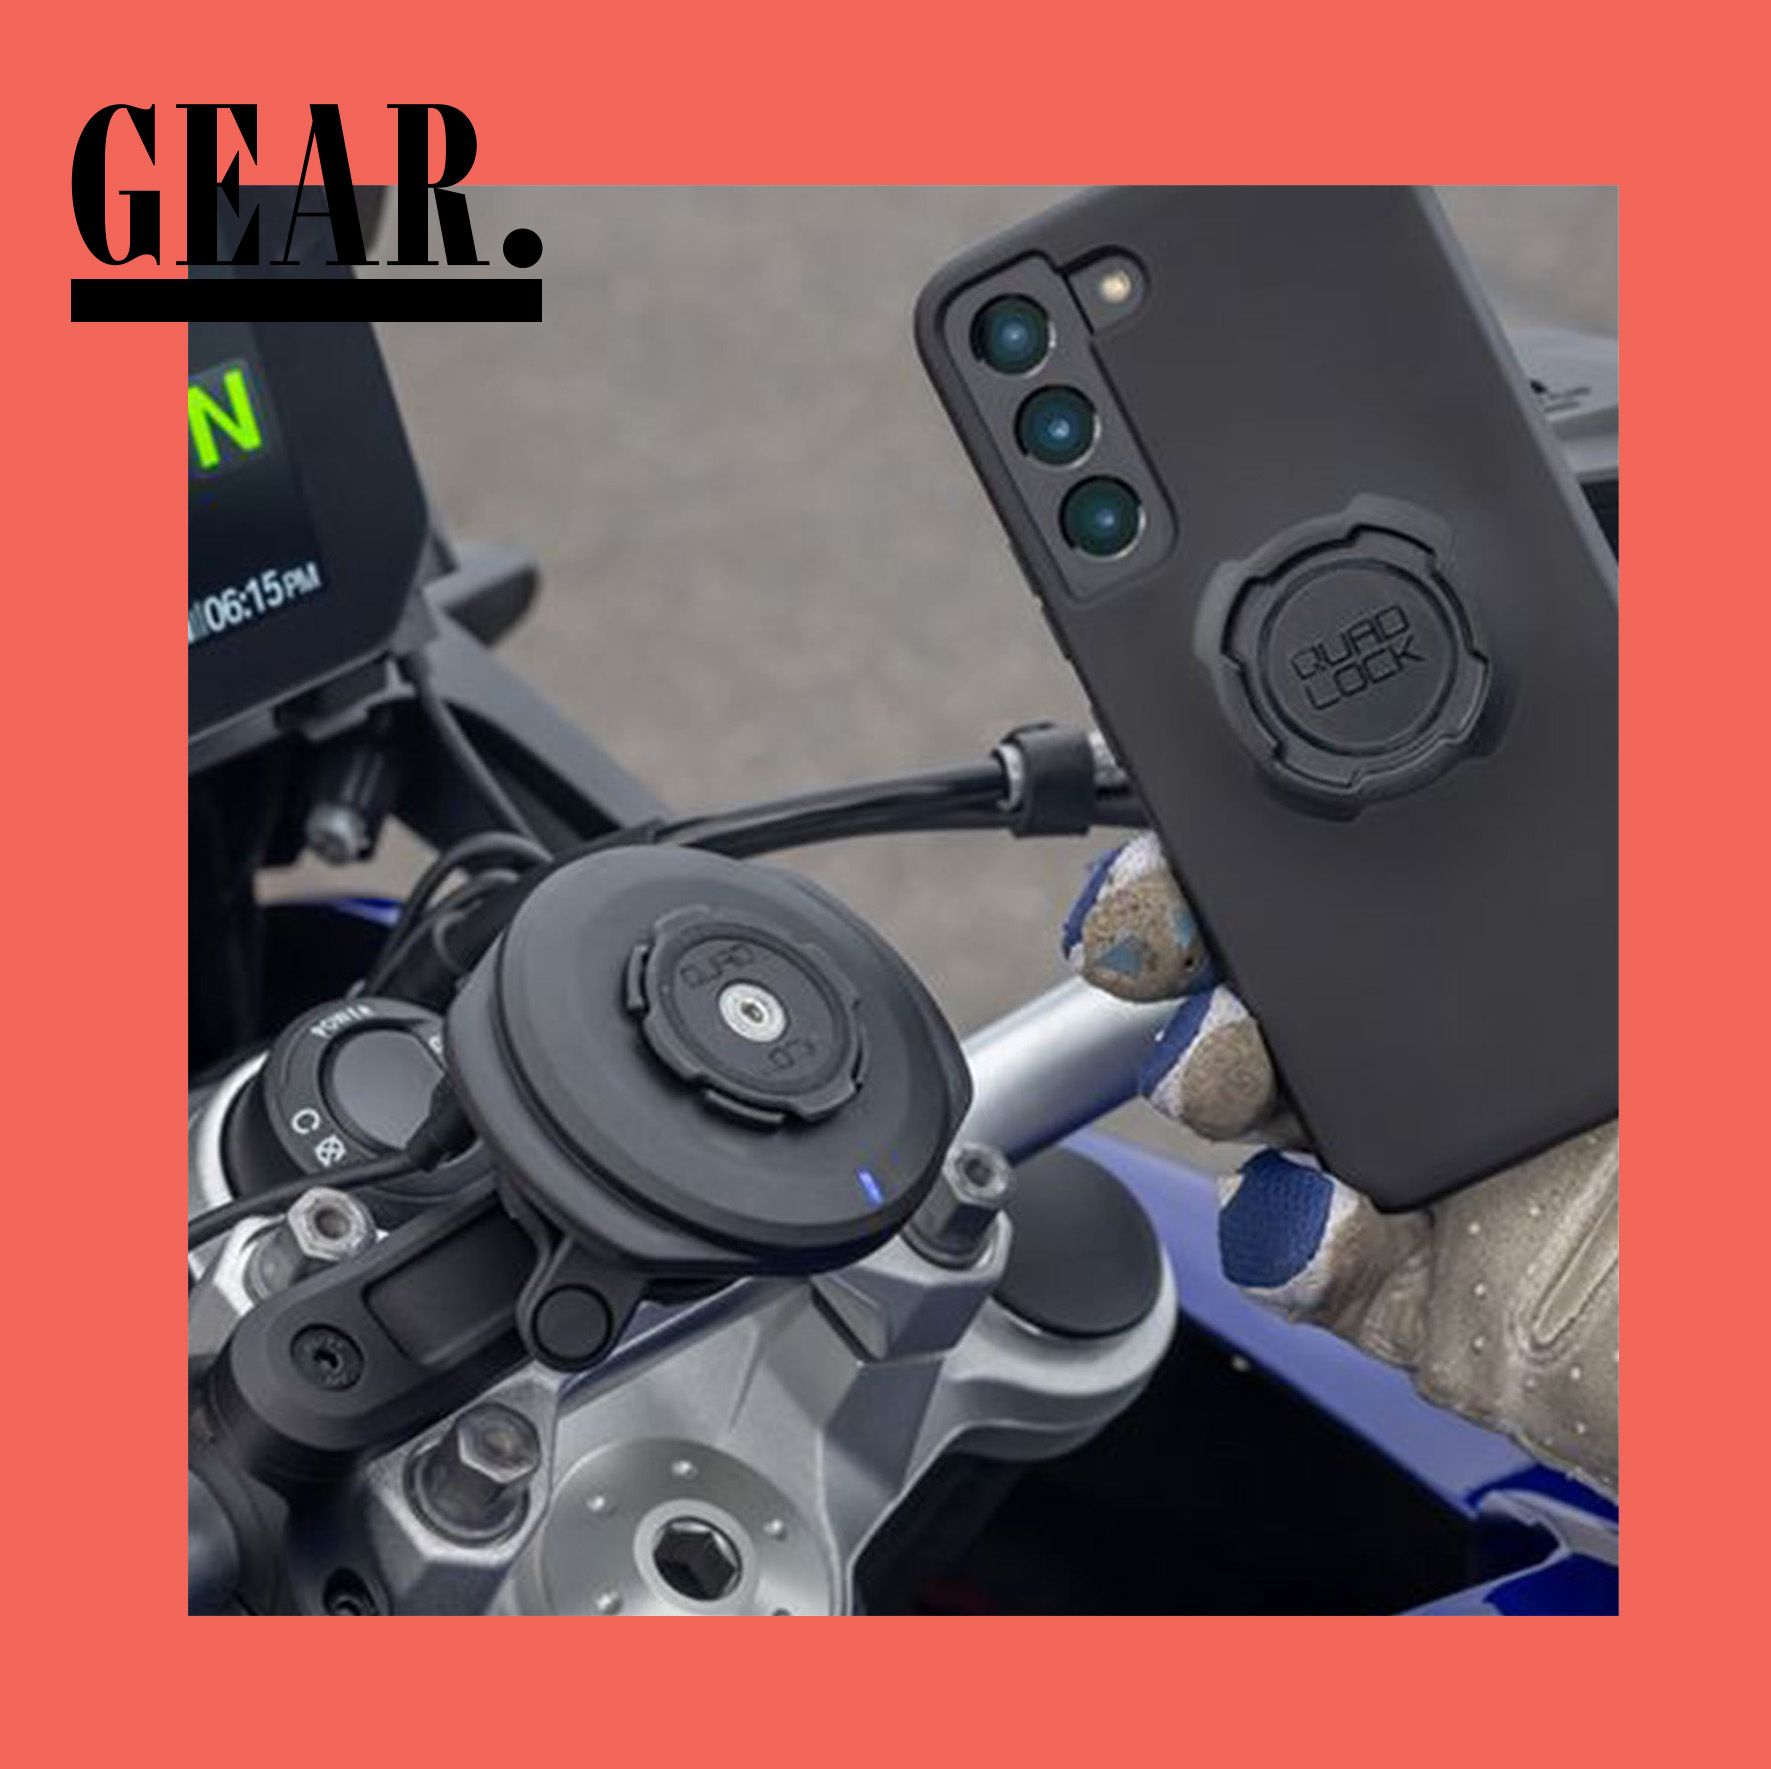 Use Your Smartphone While Riding? Here Are the Best Motorcycle Phone Mounts